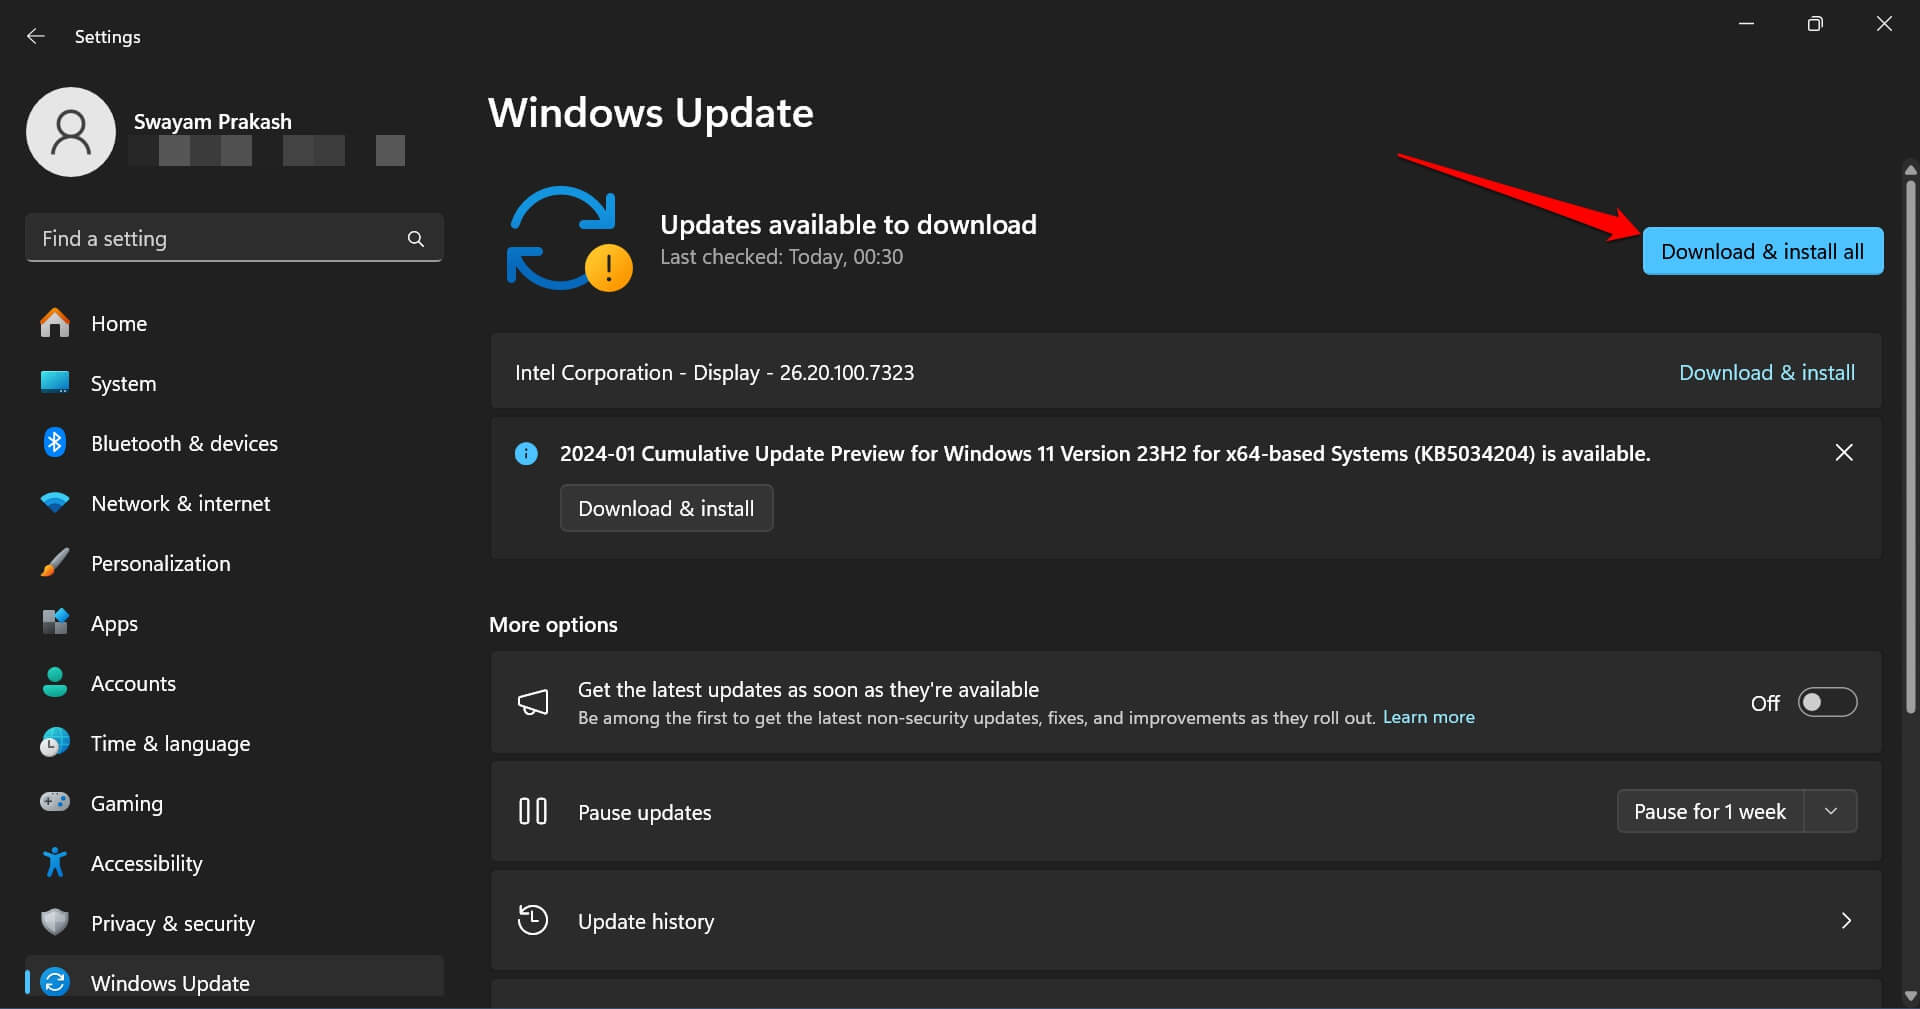 windows 11 update available to download